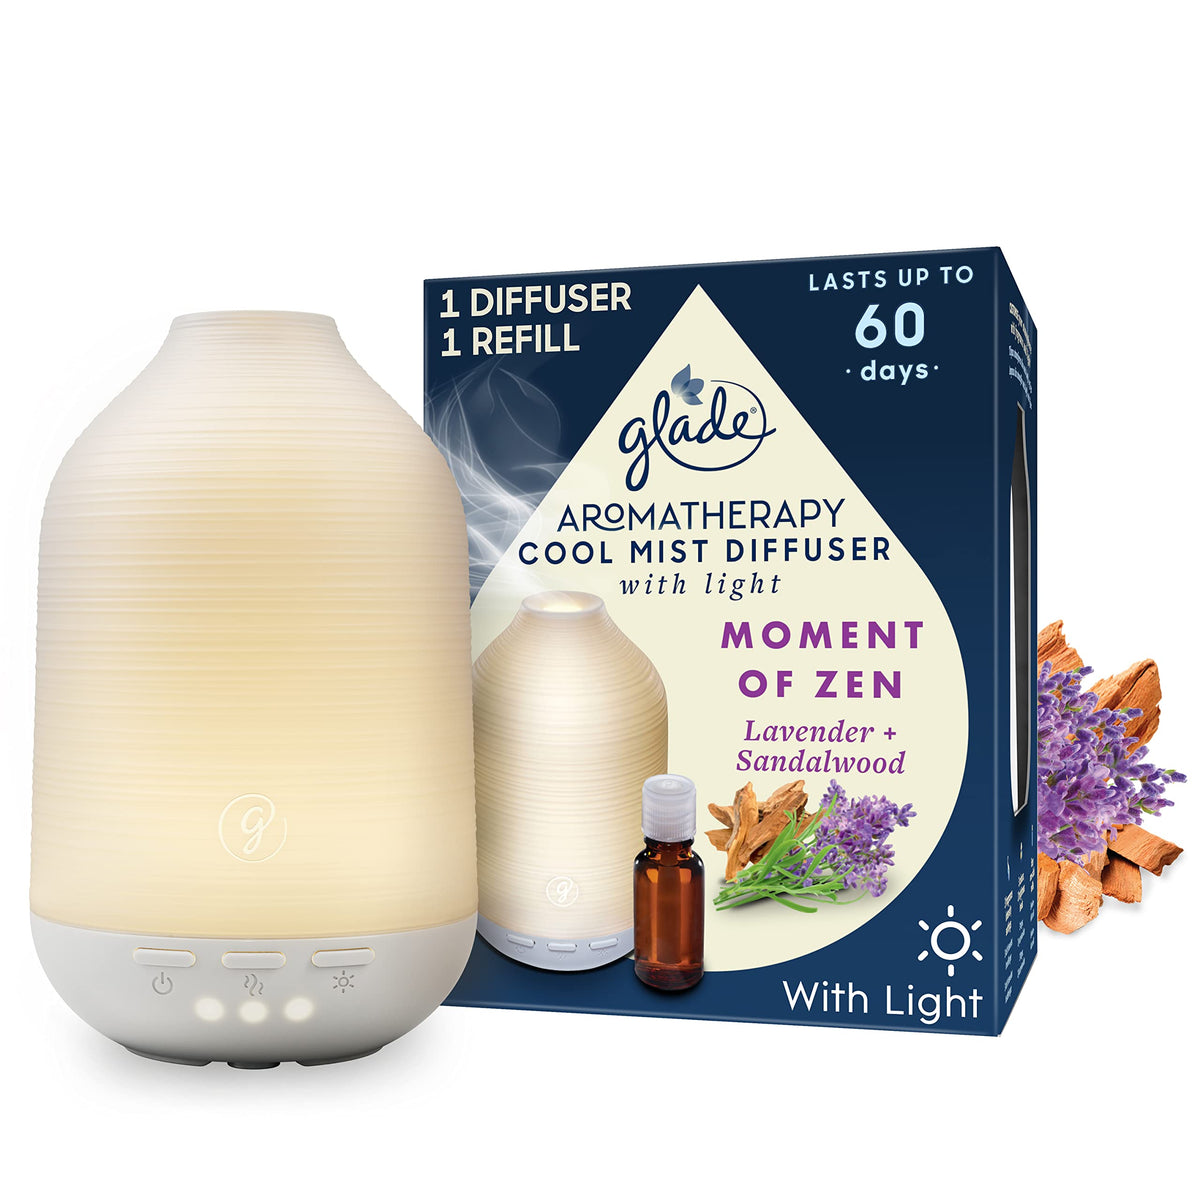 Glade Essential Oil Diffuser Holder & Refill, Cool Mist Aromatherapy Diffuser & Air Freshener for Home, Moment of Zen with Lavender & Sandalwood Scent, 17.4ml